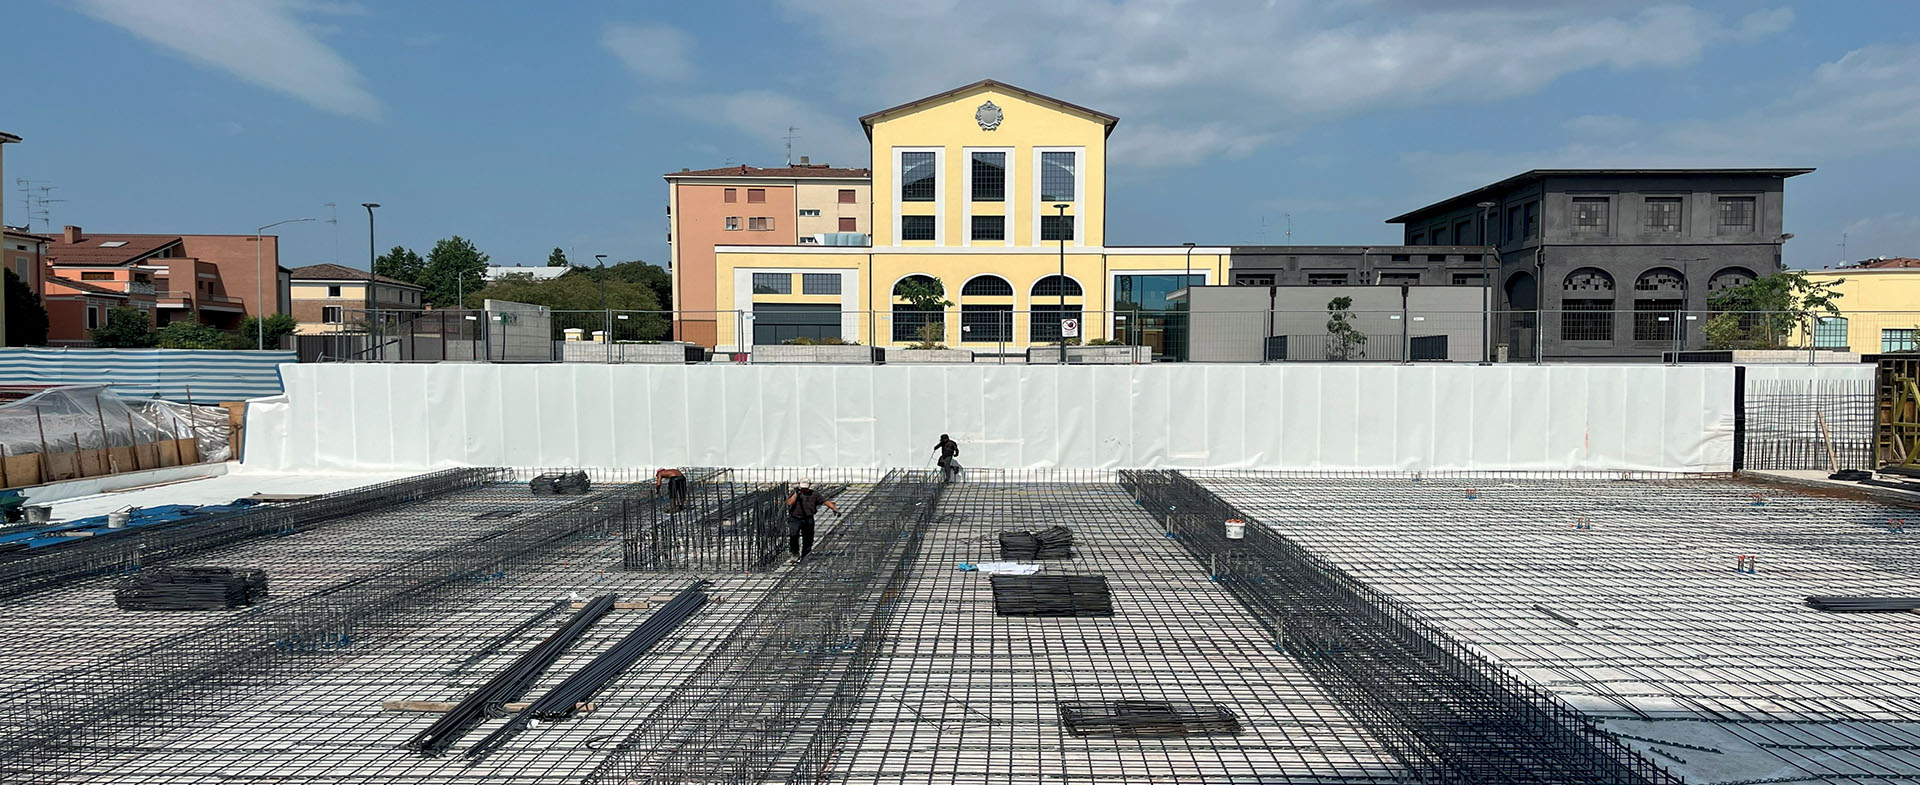 From foundations to roofs… all Mapei waterproofing solutions